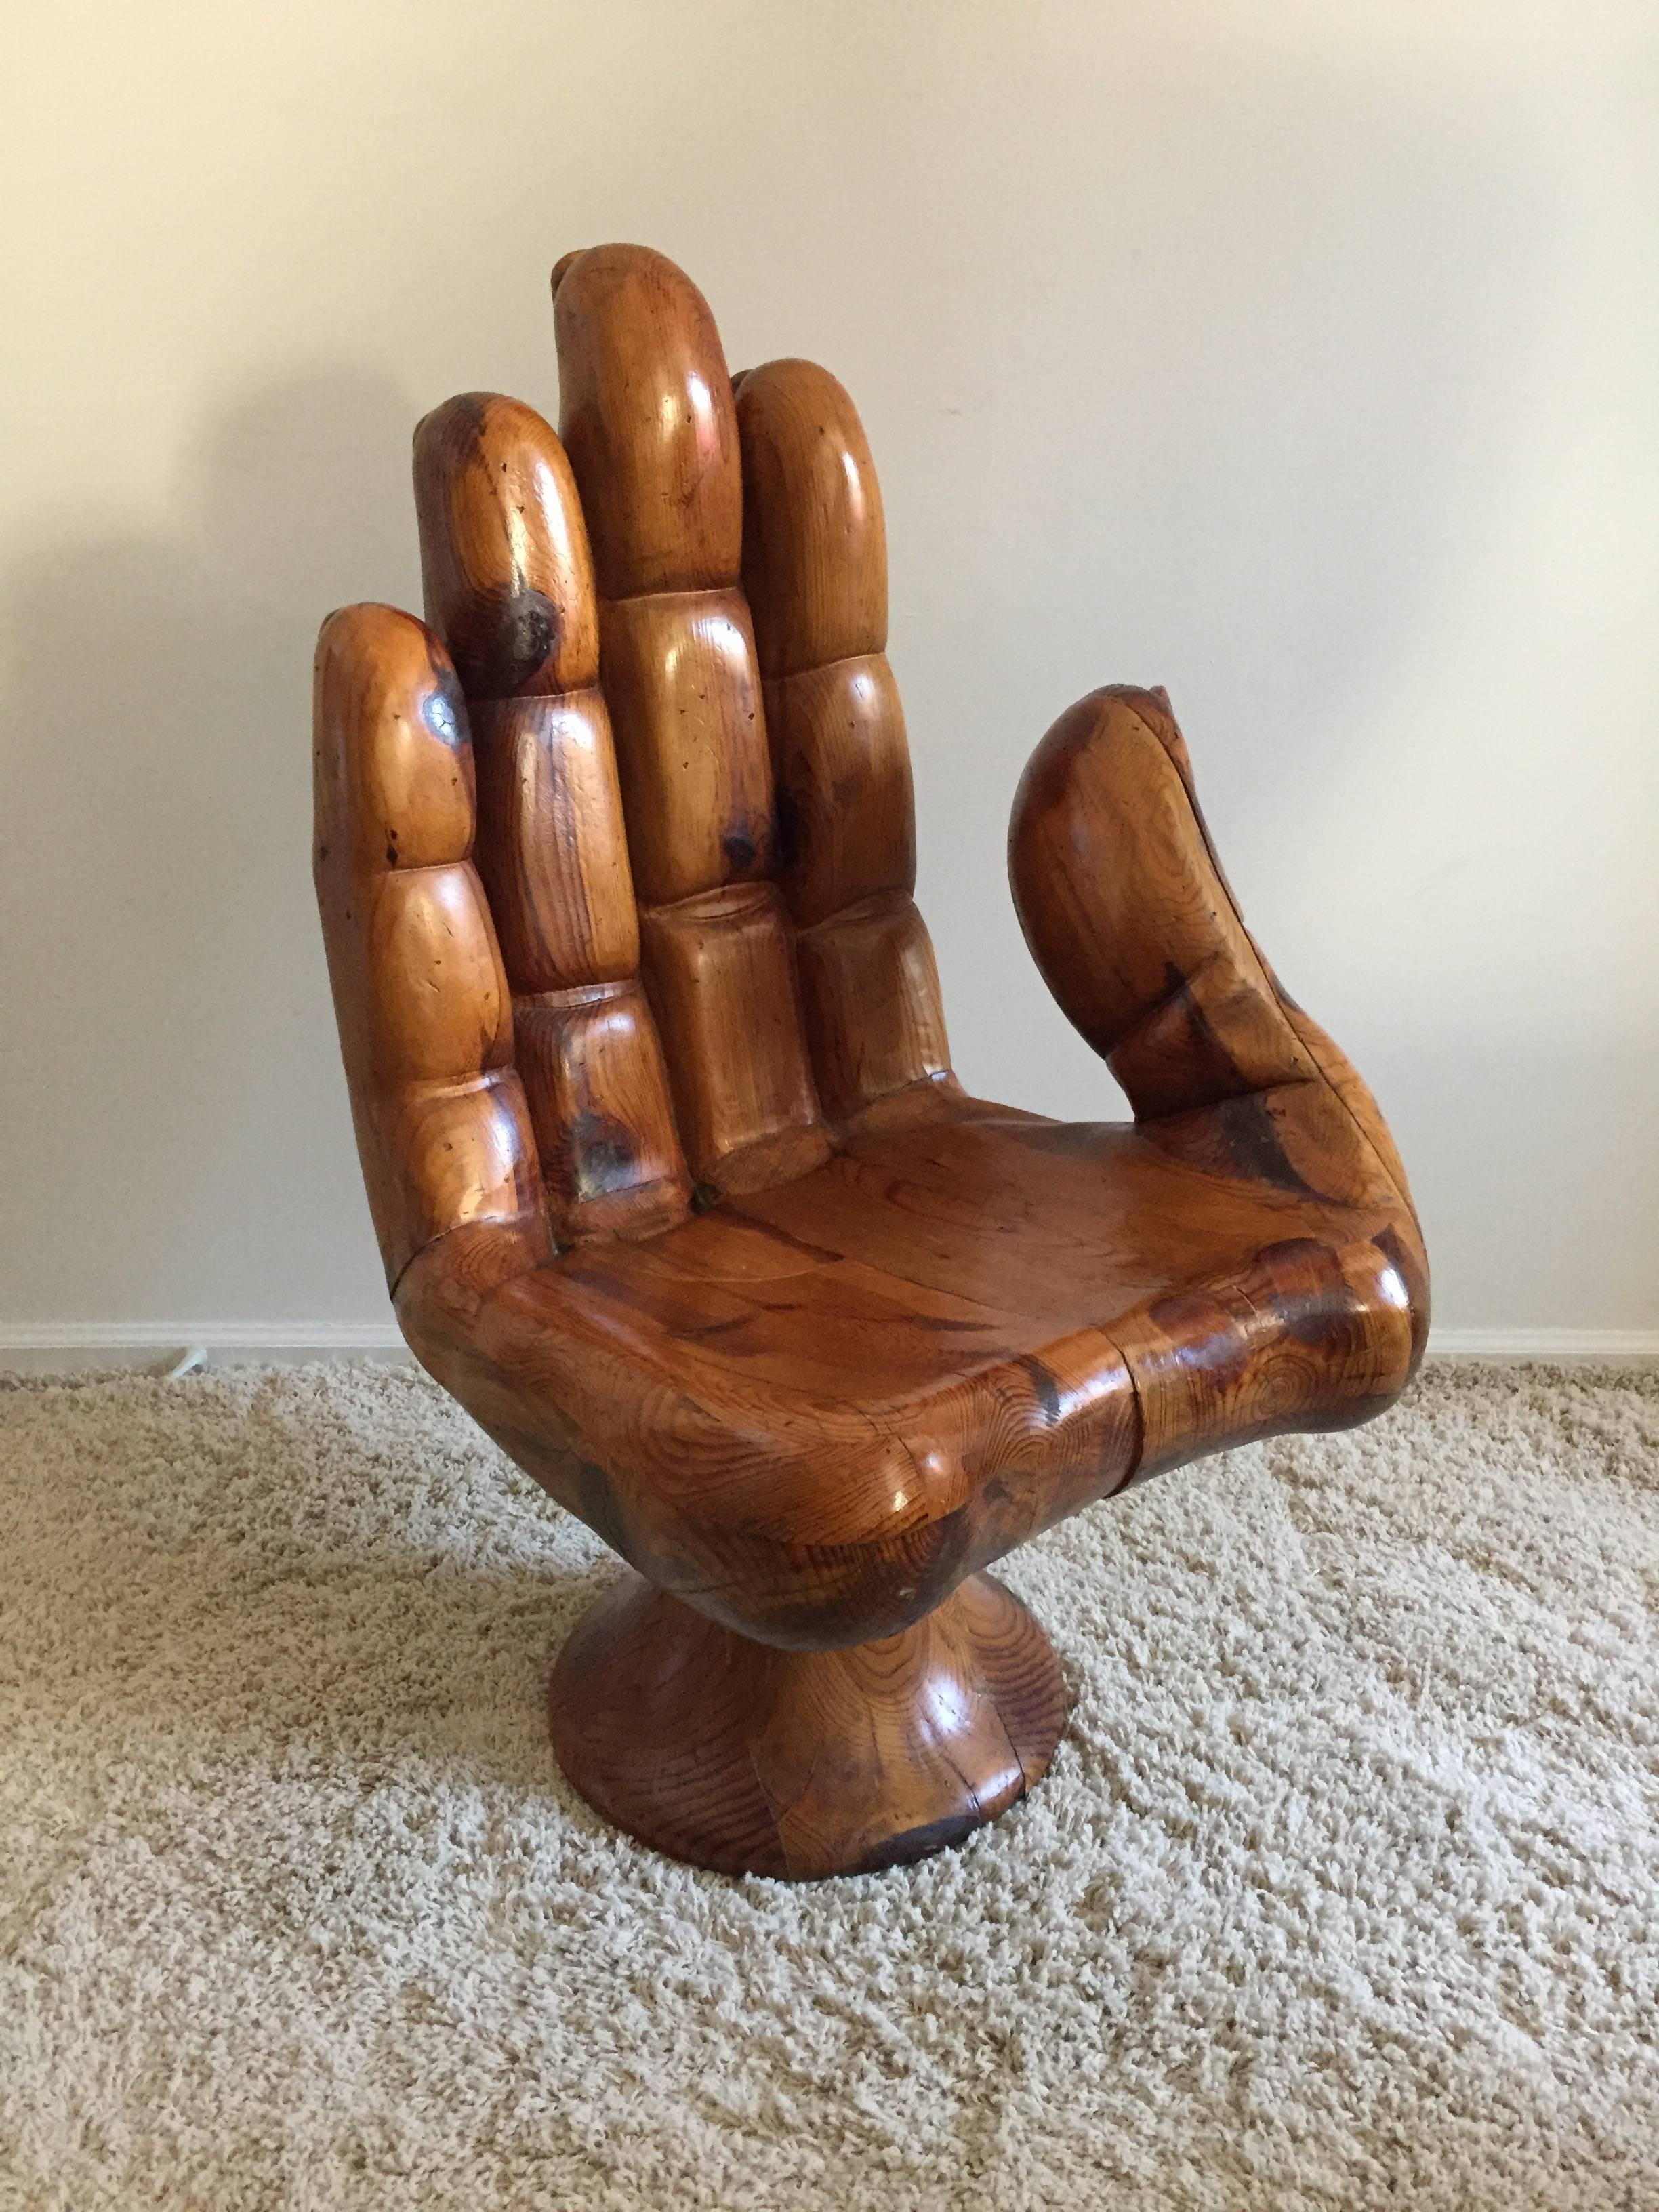 Unsigned large style Pedro Friedeberg hand-carved wooden chair. In very good original condition and finish.